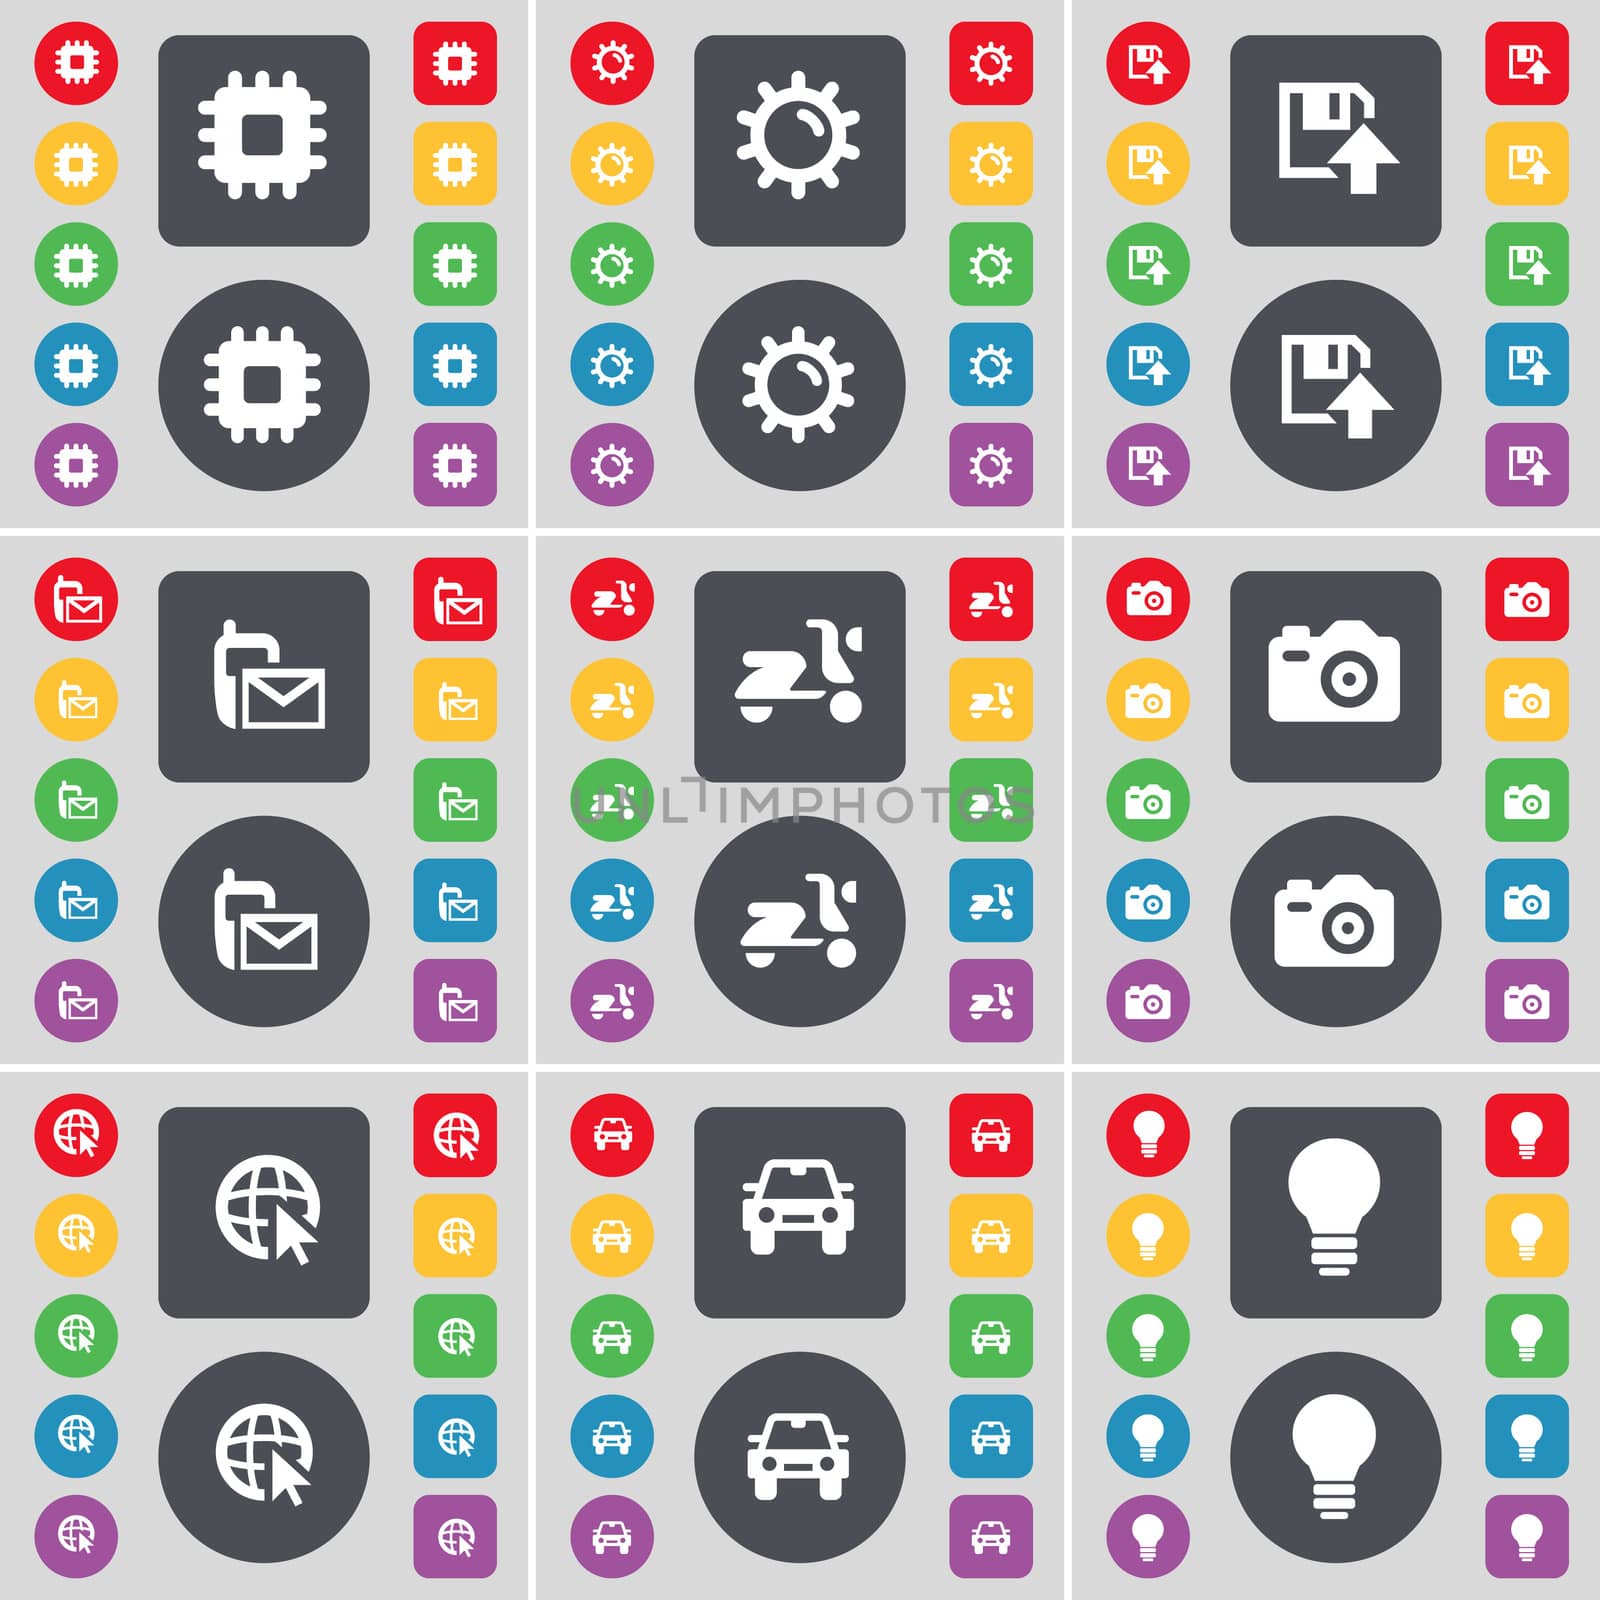 Processor, Gear, Floppy, SMS, Scooter, Camera, Web cursor, Car, Light bulb icon symbol. A large set of flat, colored buttons for your design.  by serhii_lohvyniuk